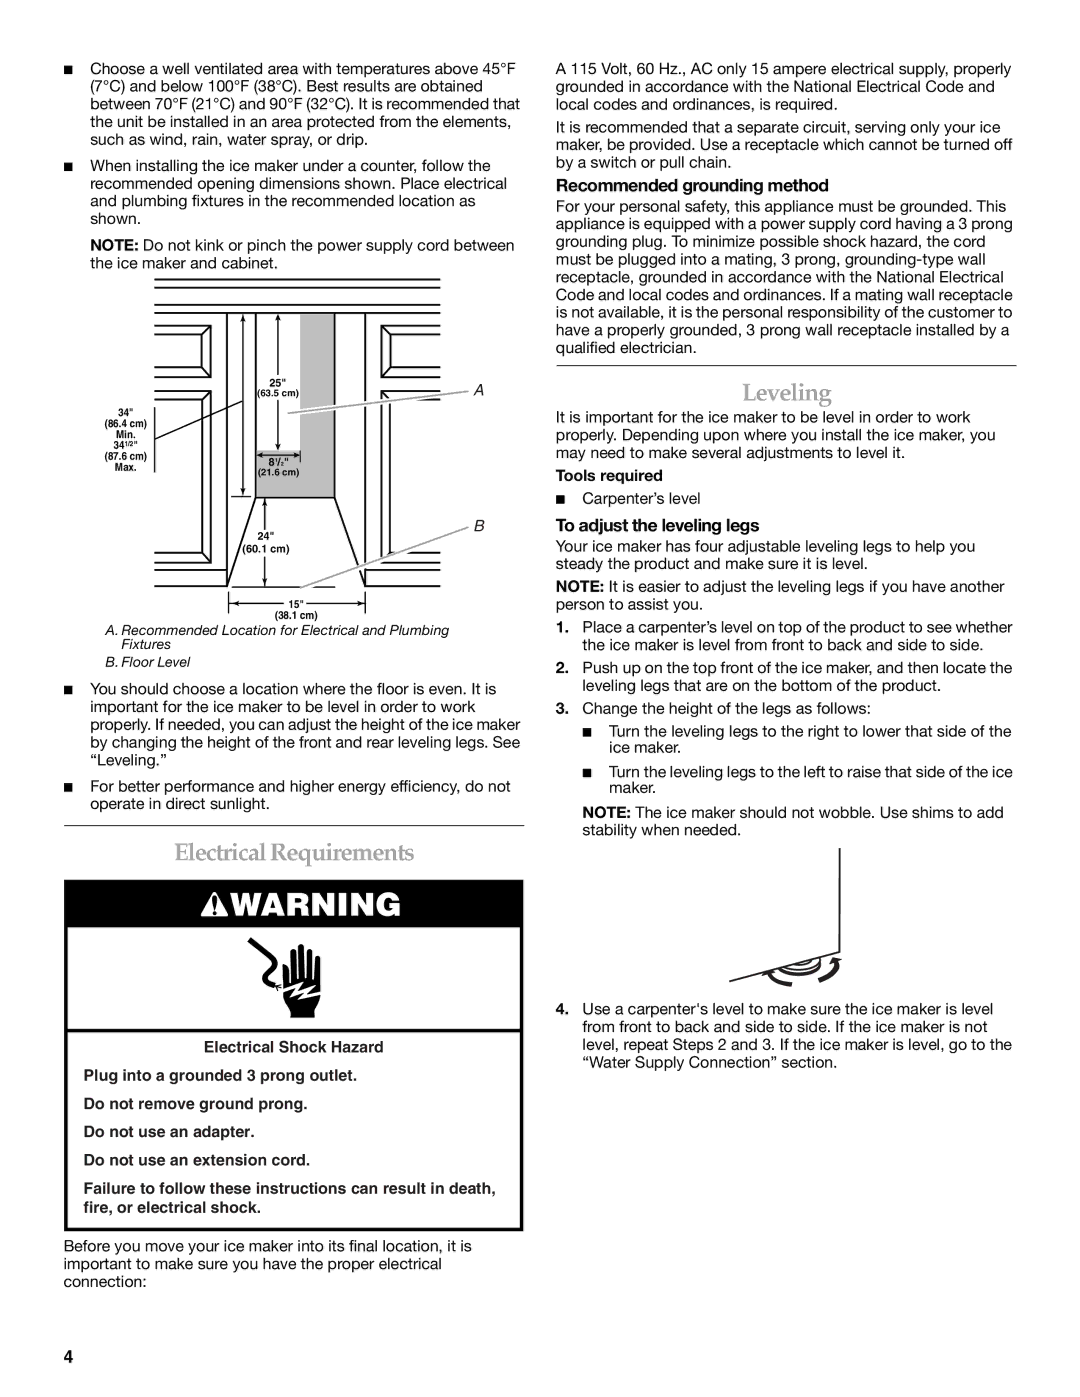 KitchenAid OUTDOOR ICE MAKER Electrical Requirements, Leveling, Recommended grounding method, To adjust the leveling legs 